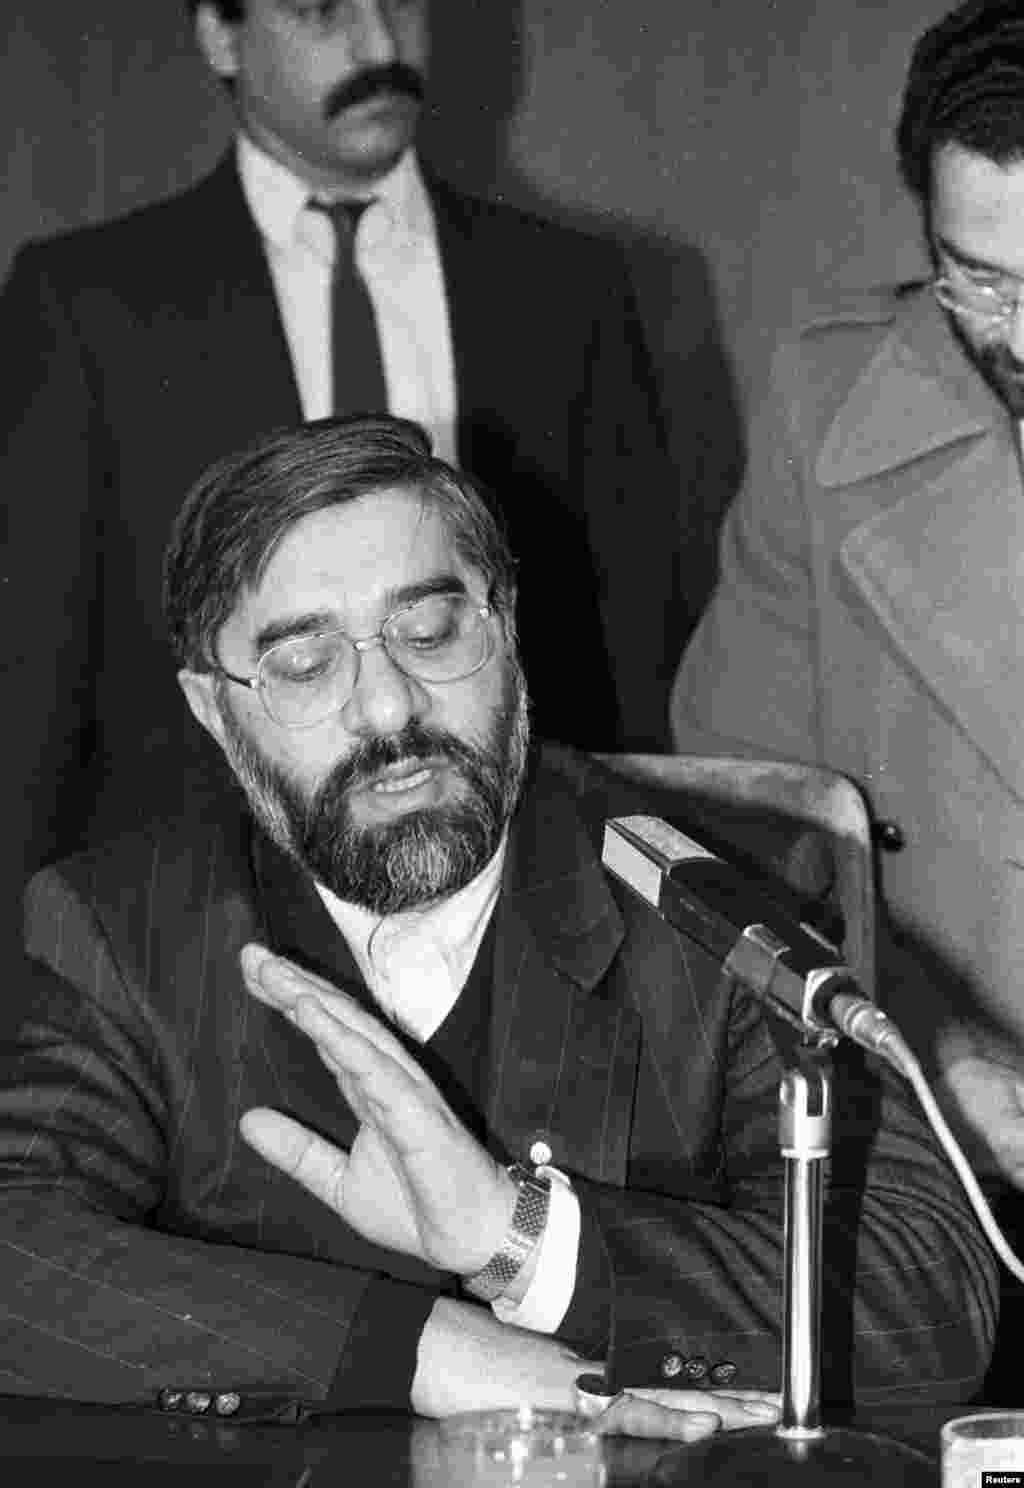 Iranian Prime Minister Mir-Hossein Musavi answers questions about the Rushdie fatwa during a press conference at Ankara airport in February 1989, shortly after Khomeini declared the death sentence. (REUTERS/Fatih Saribas)